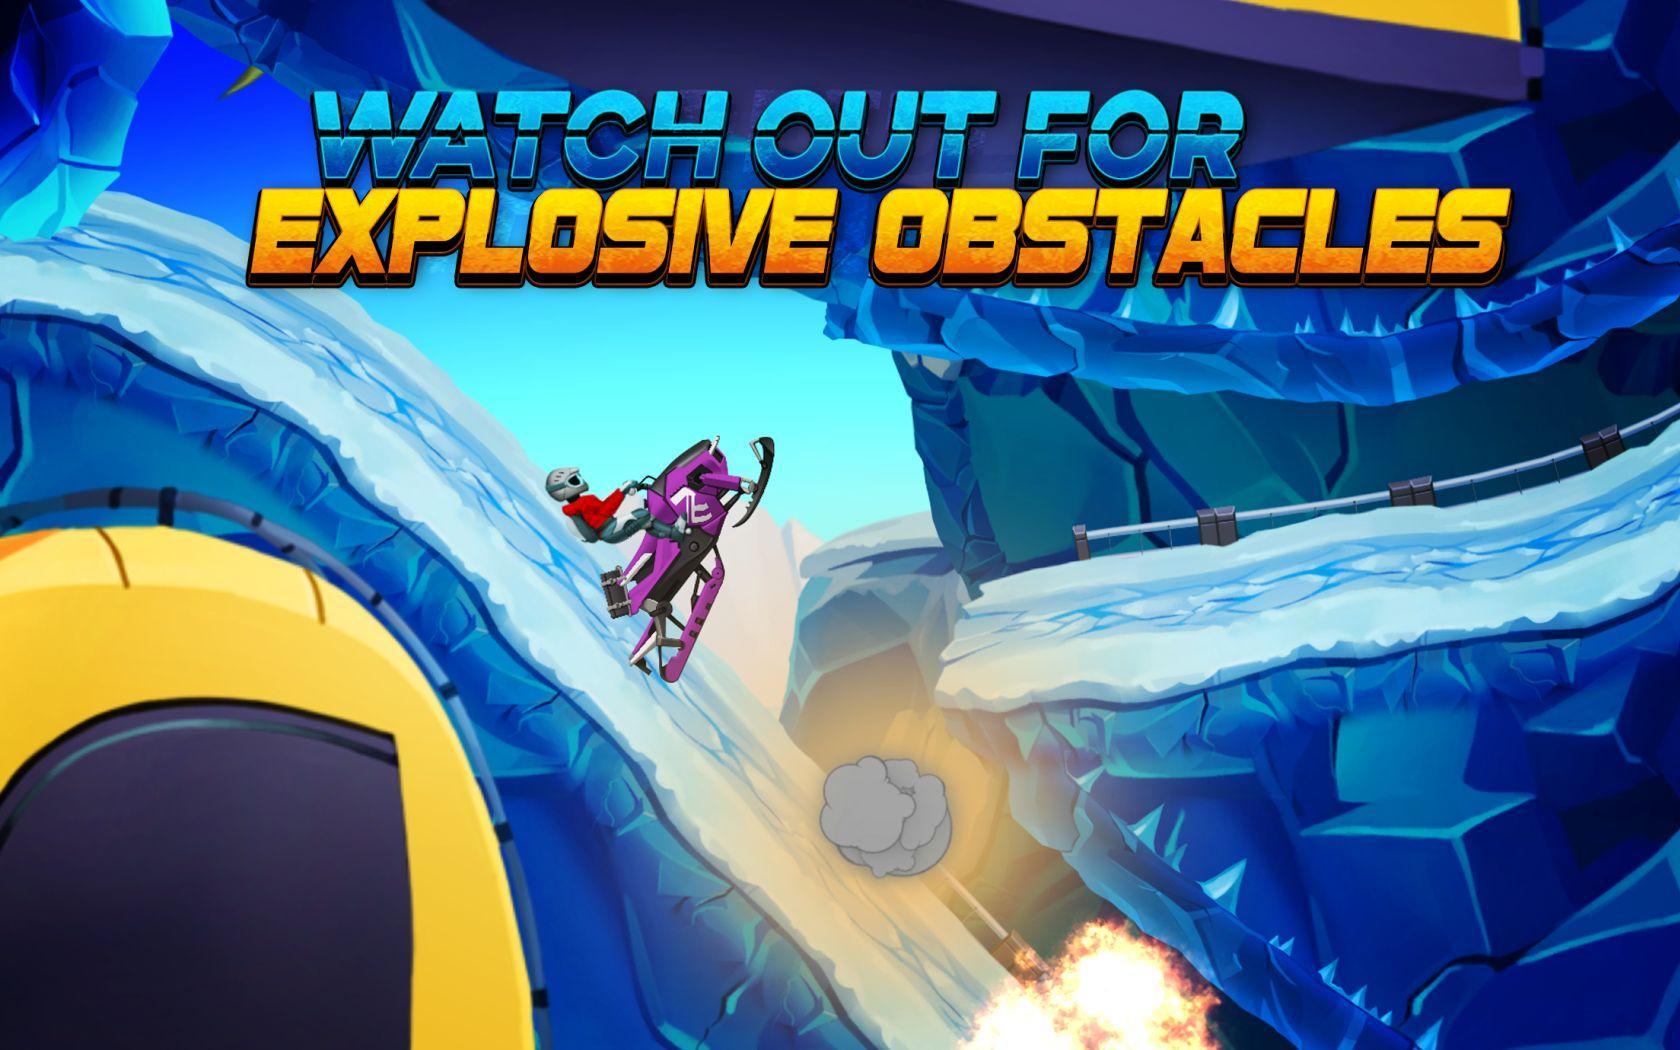 Screenshot of Winter Sports Game: Risky Road Snowmobile Race